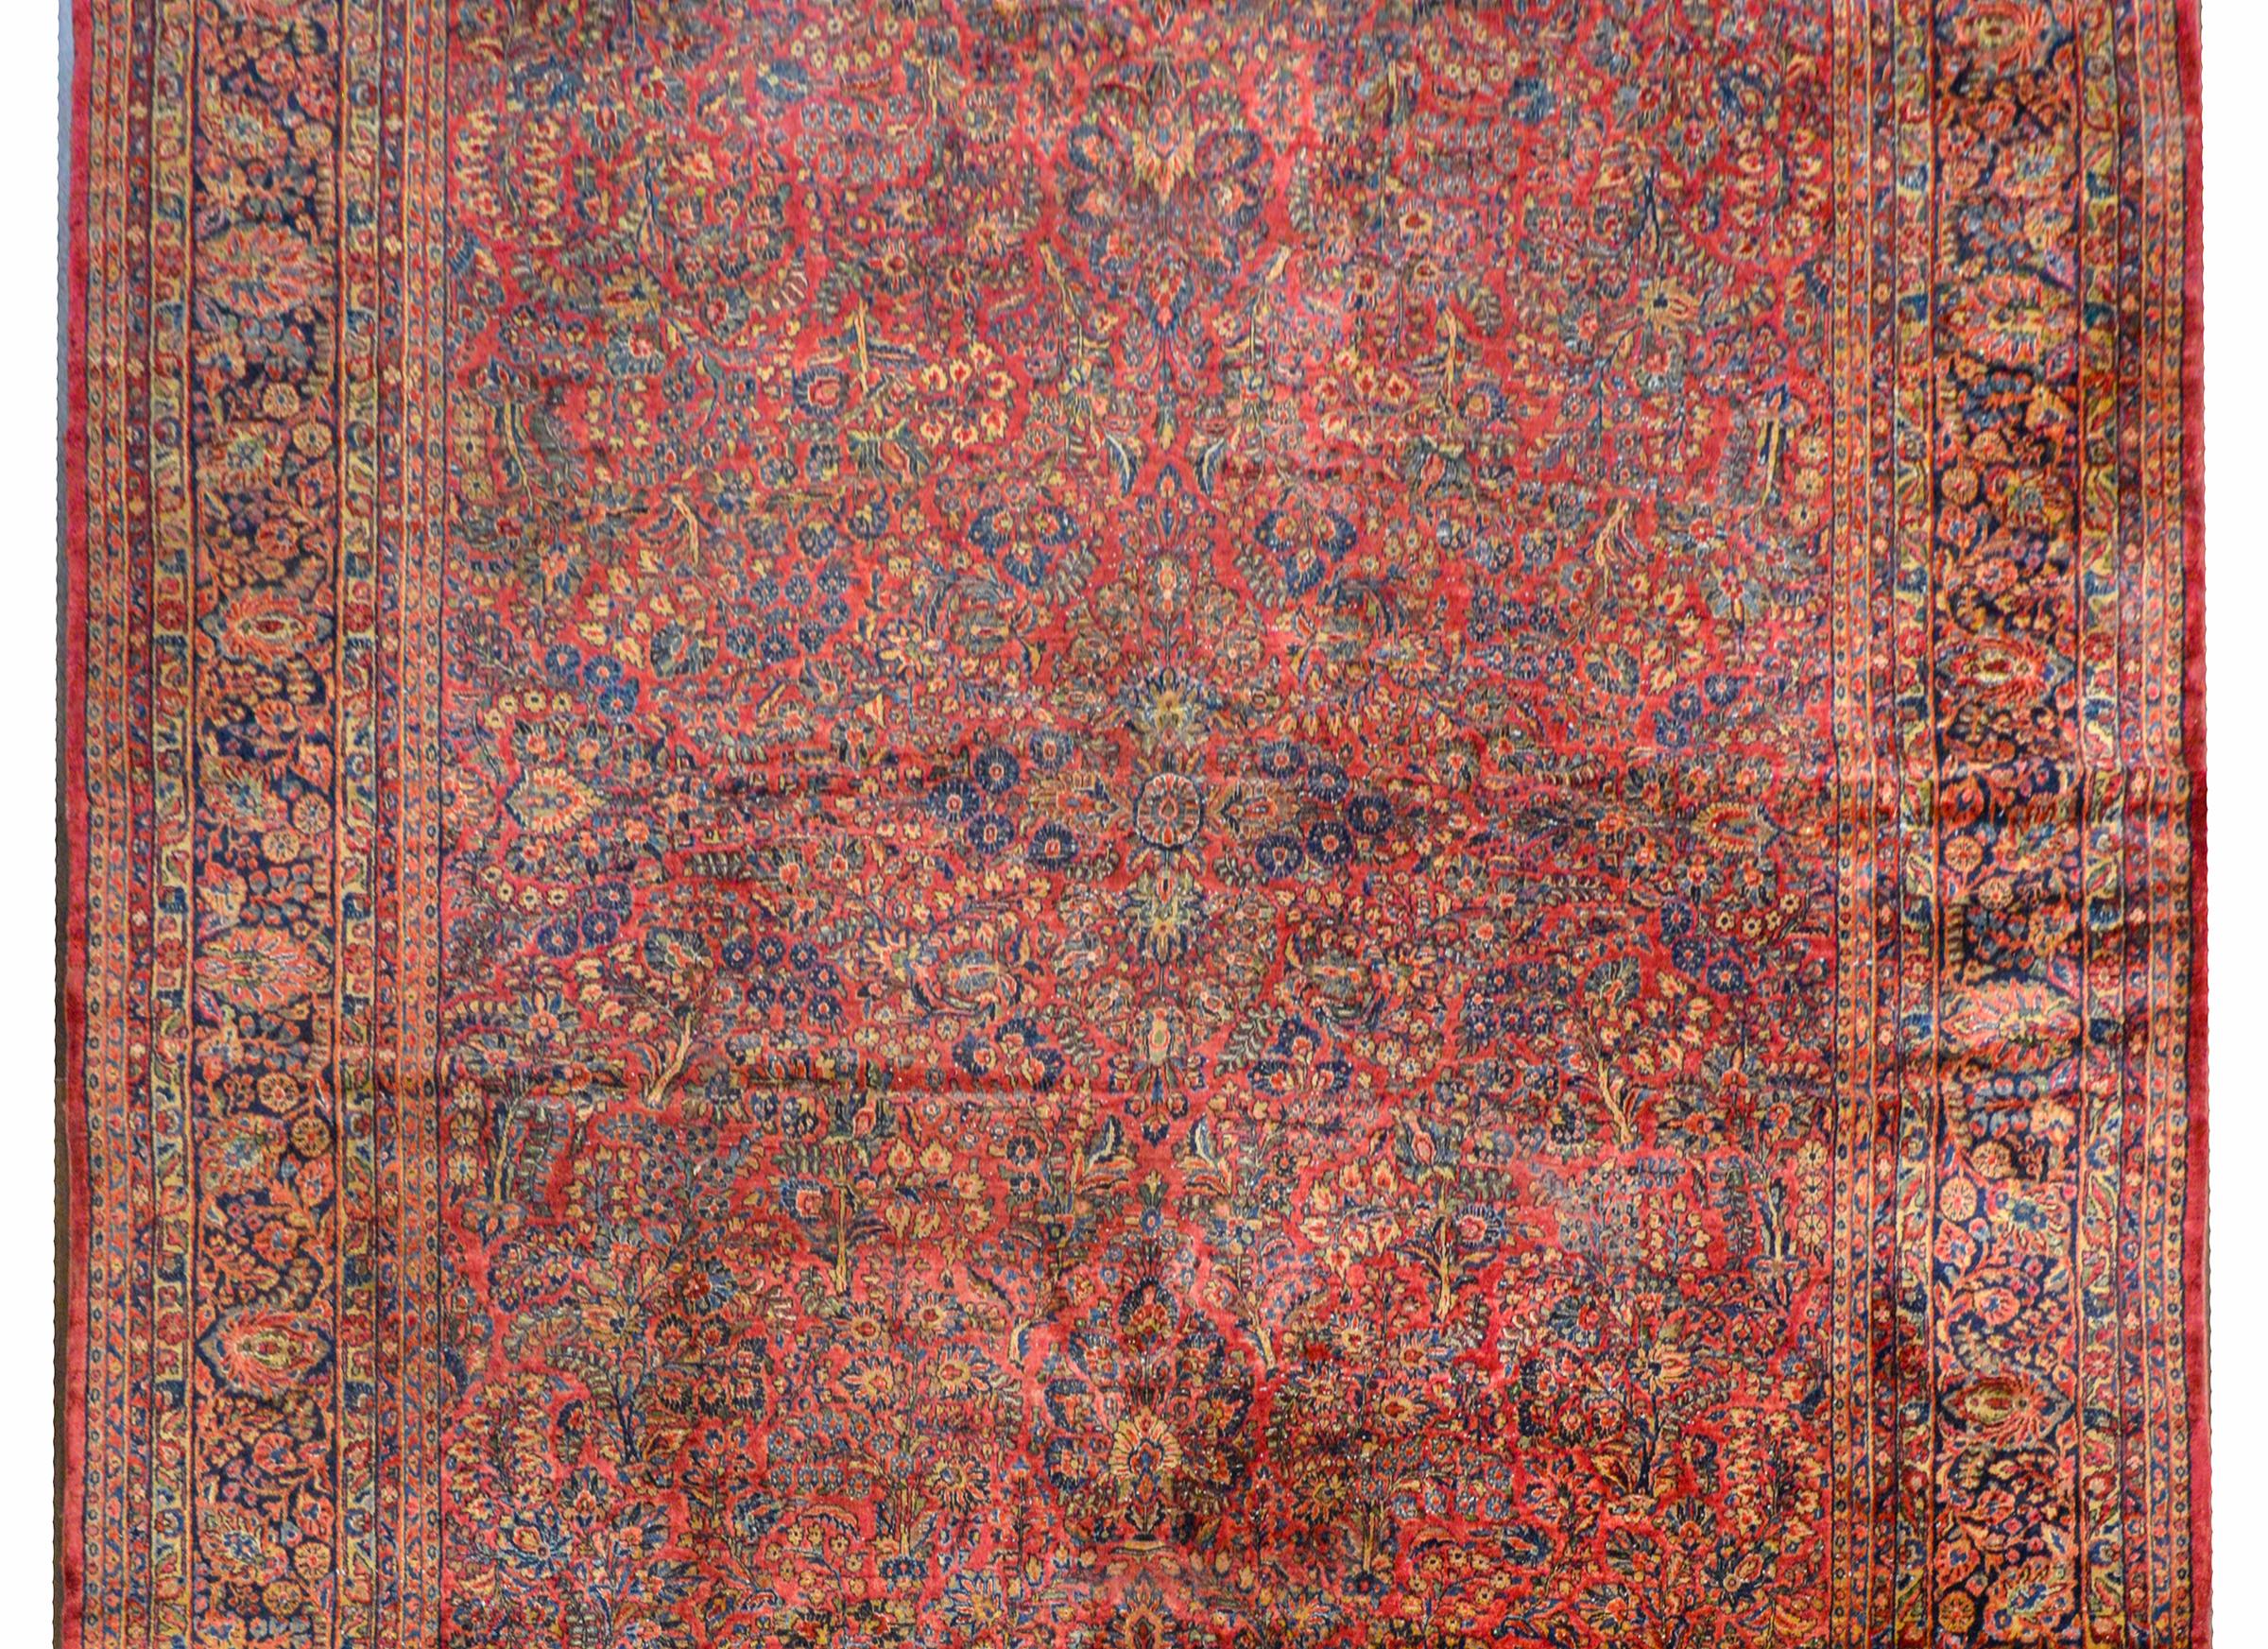 An extraordinary early 20th century Sarouk rug with an elaborate all-over pattern containing myriad flowers woven in traditional Sarouk colors of light and dark indigo, cream, pink, and crimson, all on a cranberry background. The border is elaborate